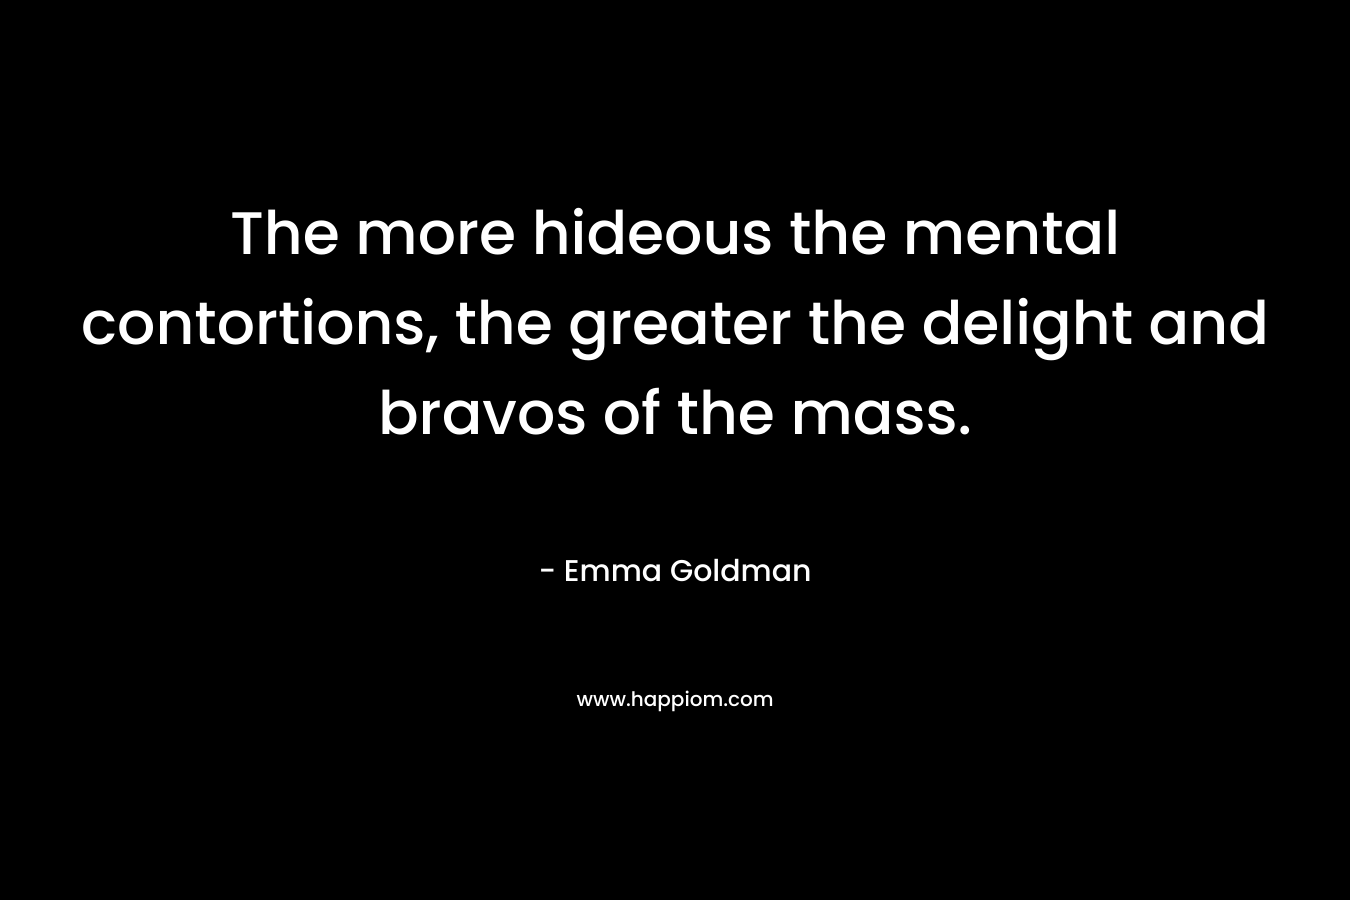 The more hideous the mental contortions, the greater the delight and bravos of the mass. – Emma Goldman